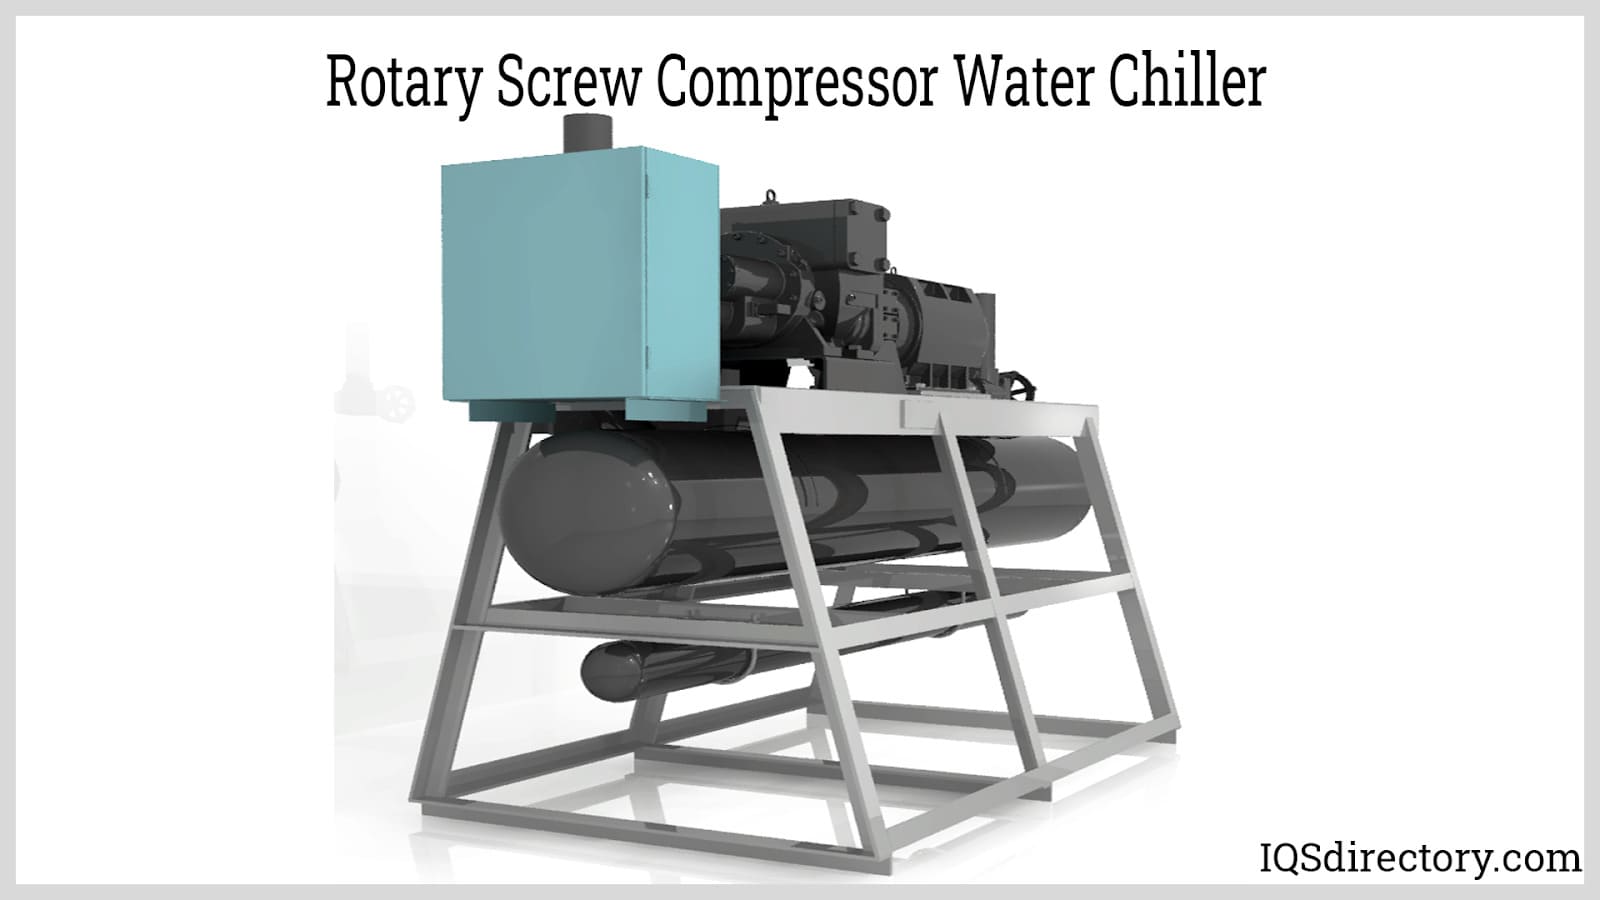 Rotary Screw Compressor Water Chiller